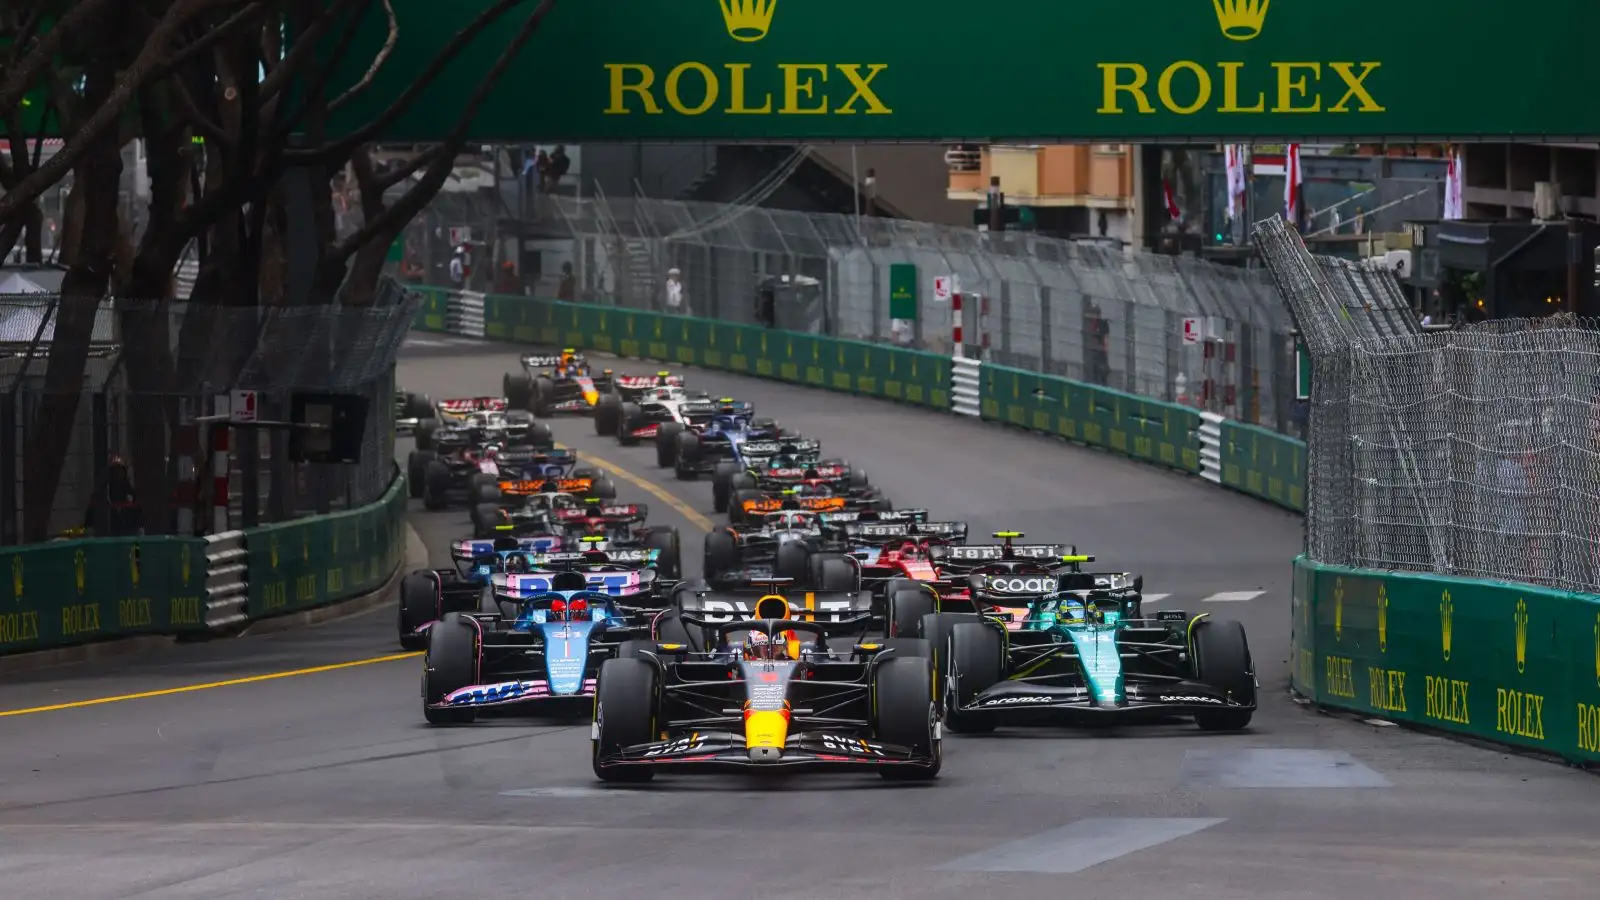 Max Verstappen leads the field at the start of the F1 2023 Monaco Grand Prix.